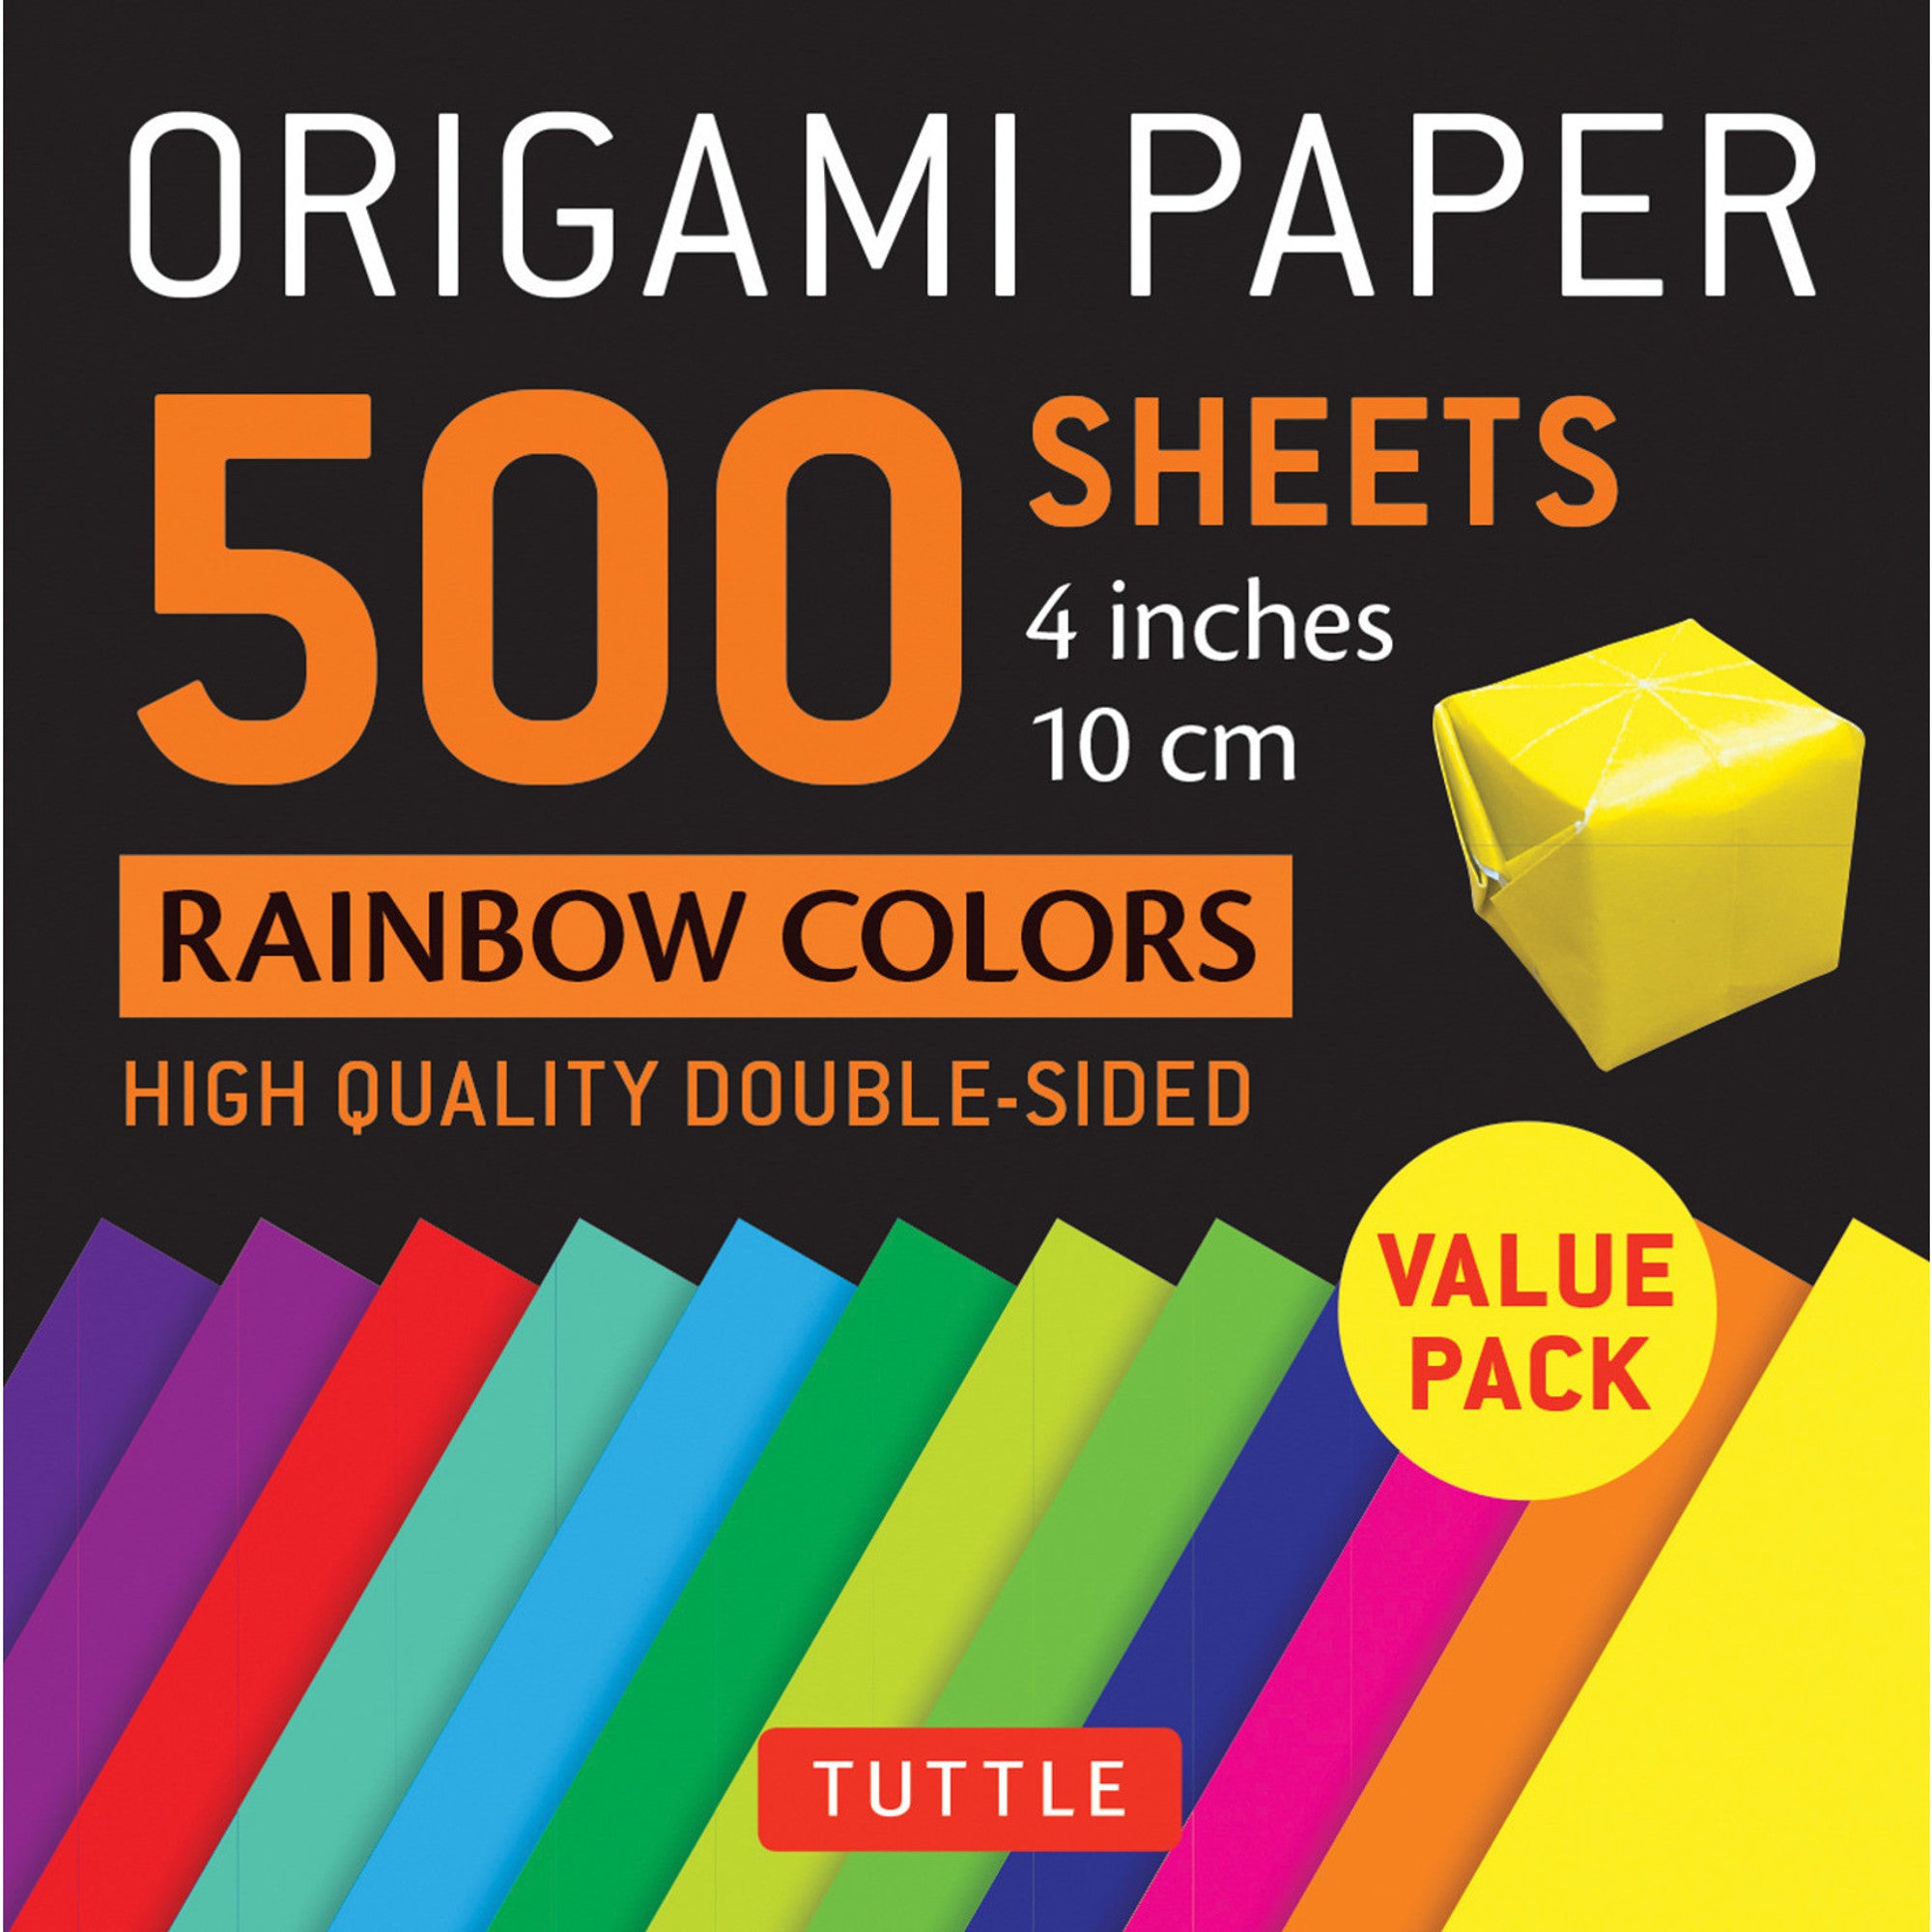 500 Sheets 4” Rainbow Color Duo Origami Paper